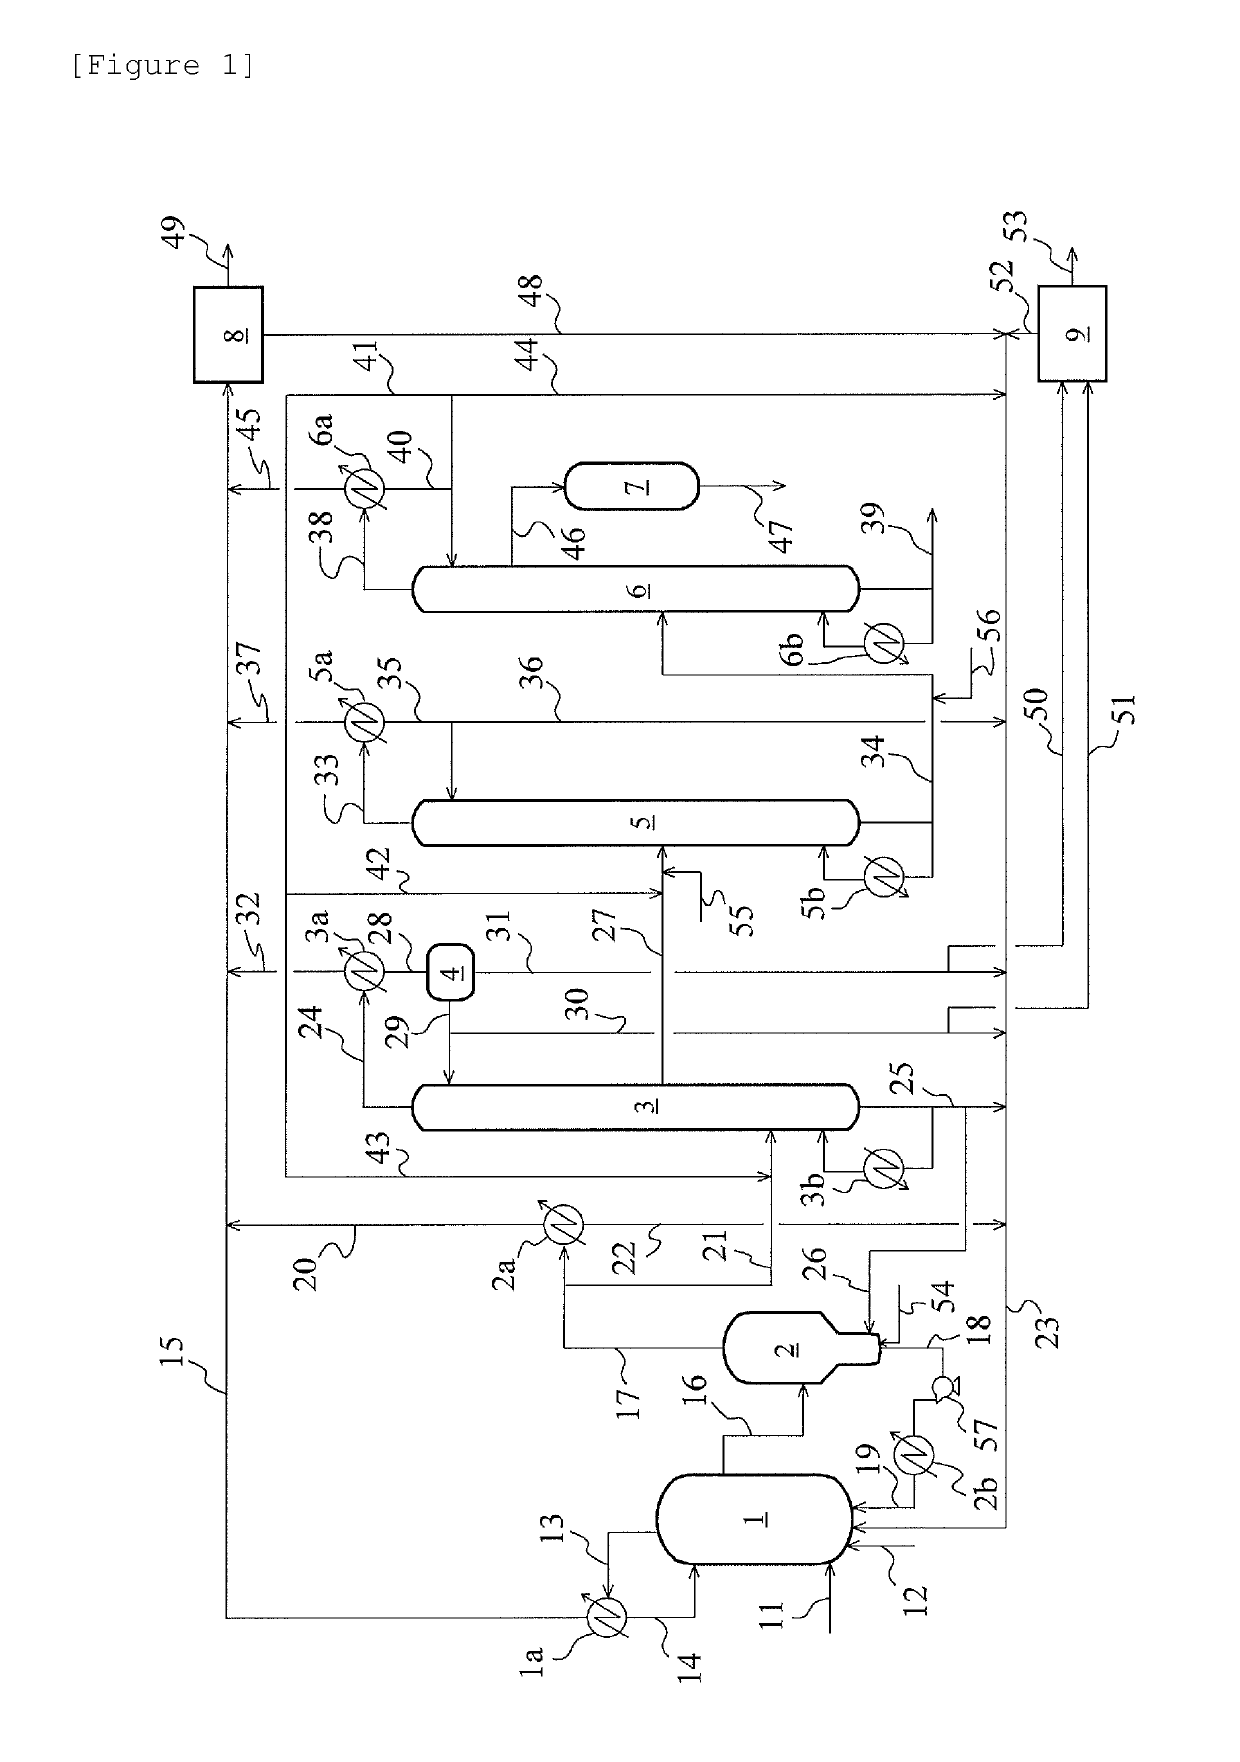 Method for producing acetic acid